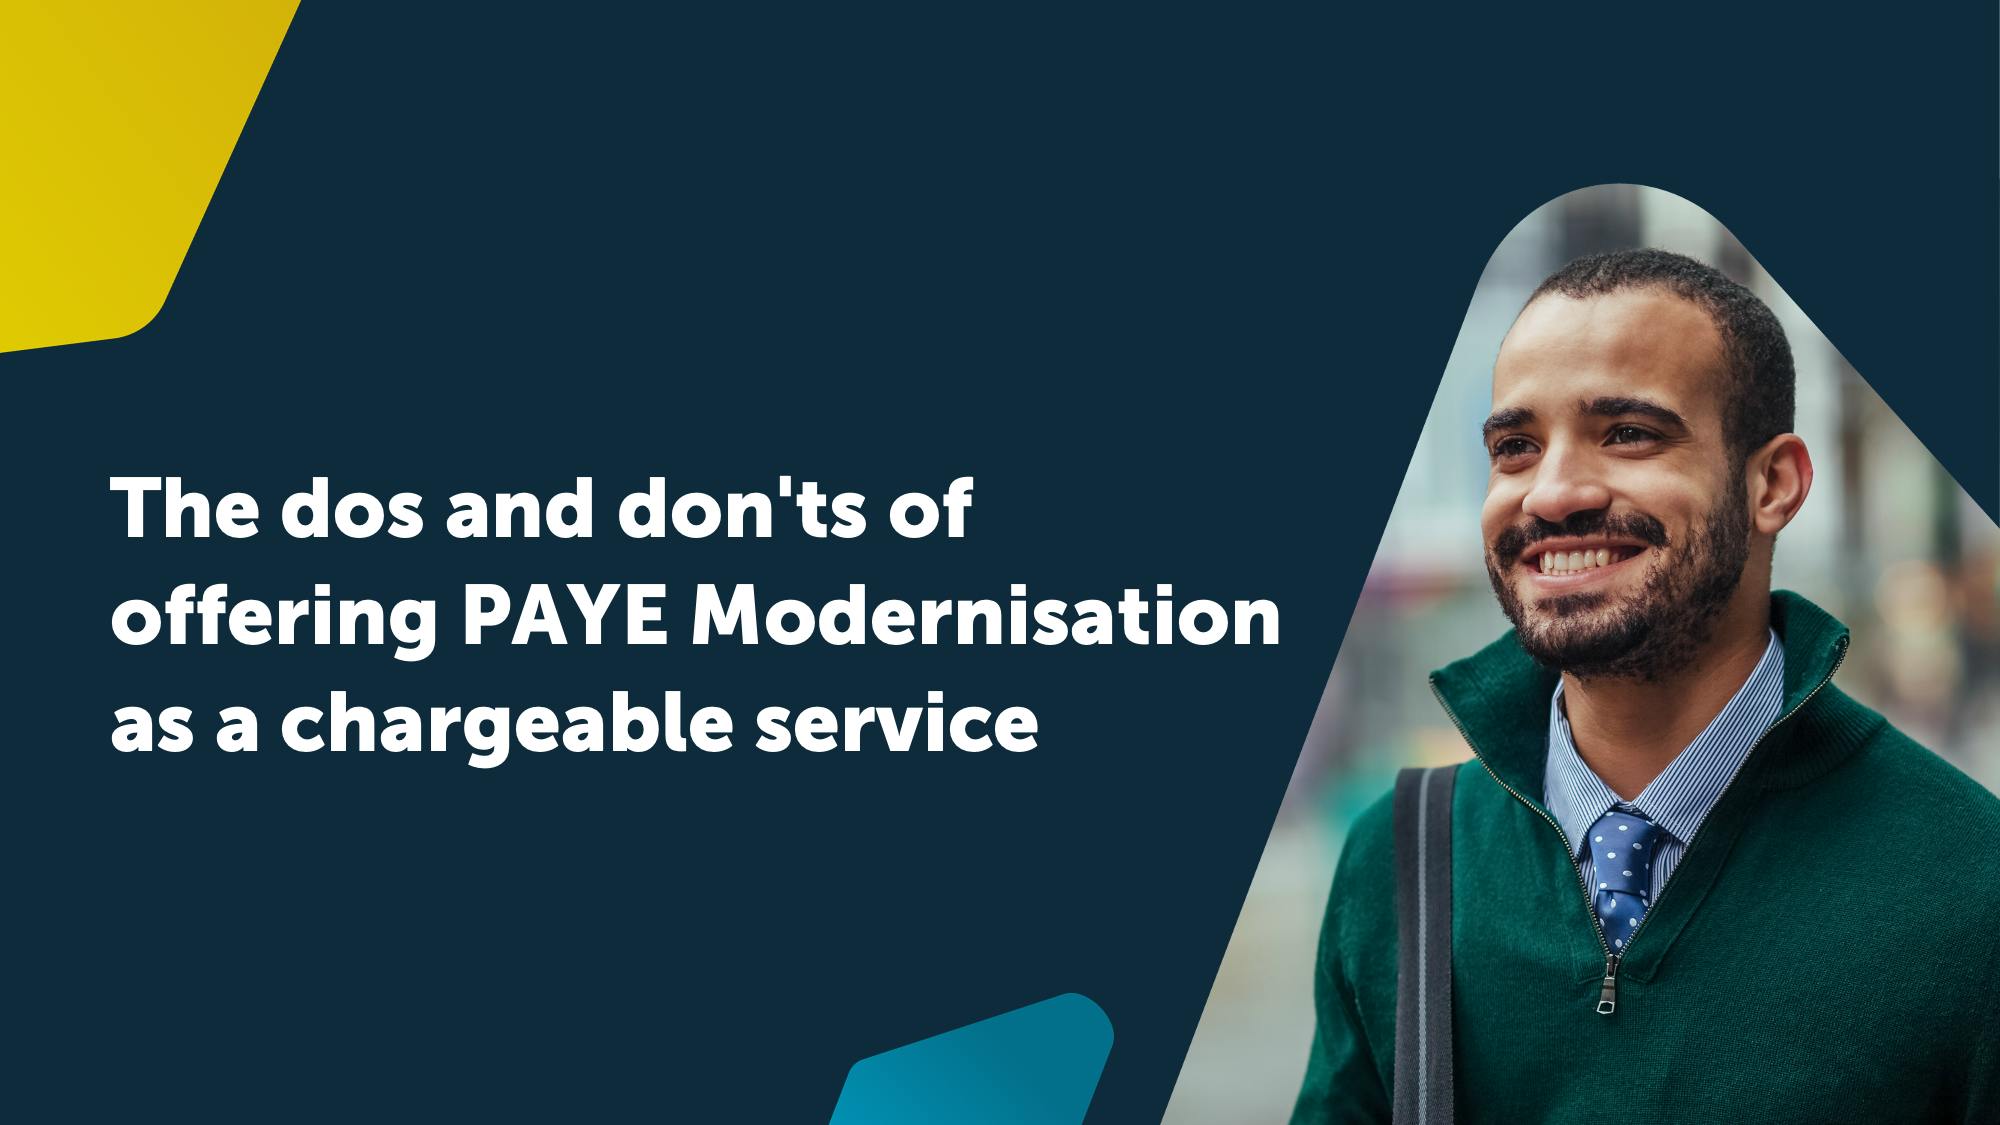 10 quick tips to a successful PAYE modernisation strategy for payroll bureaus